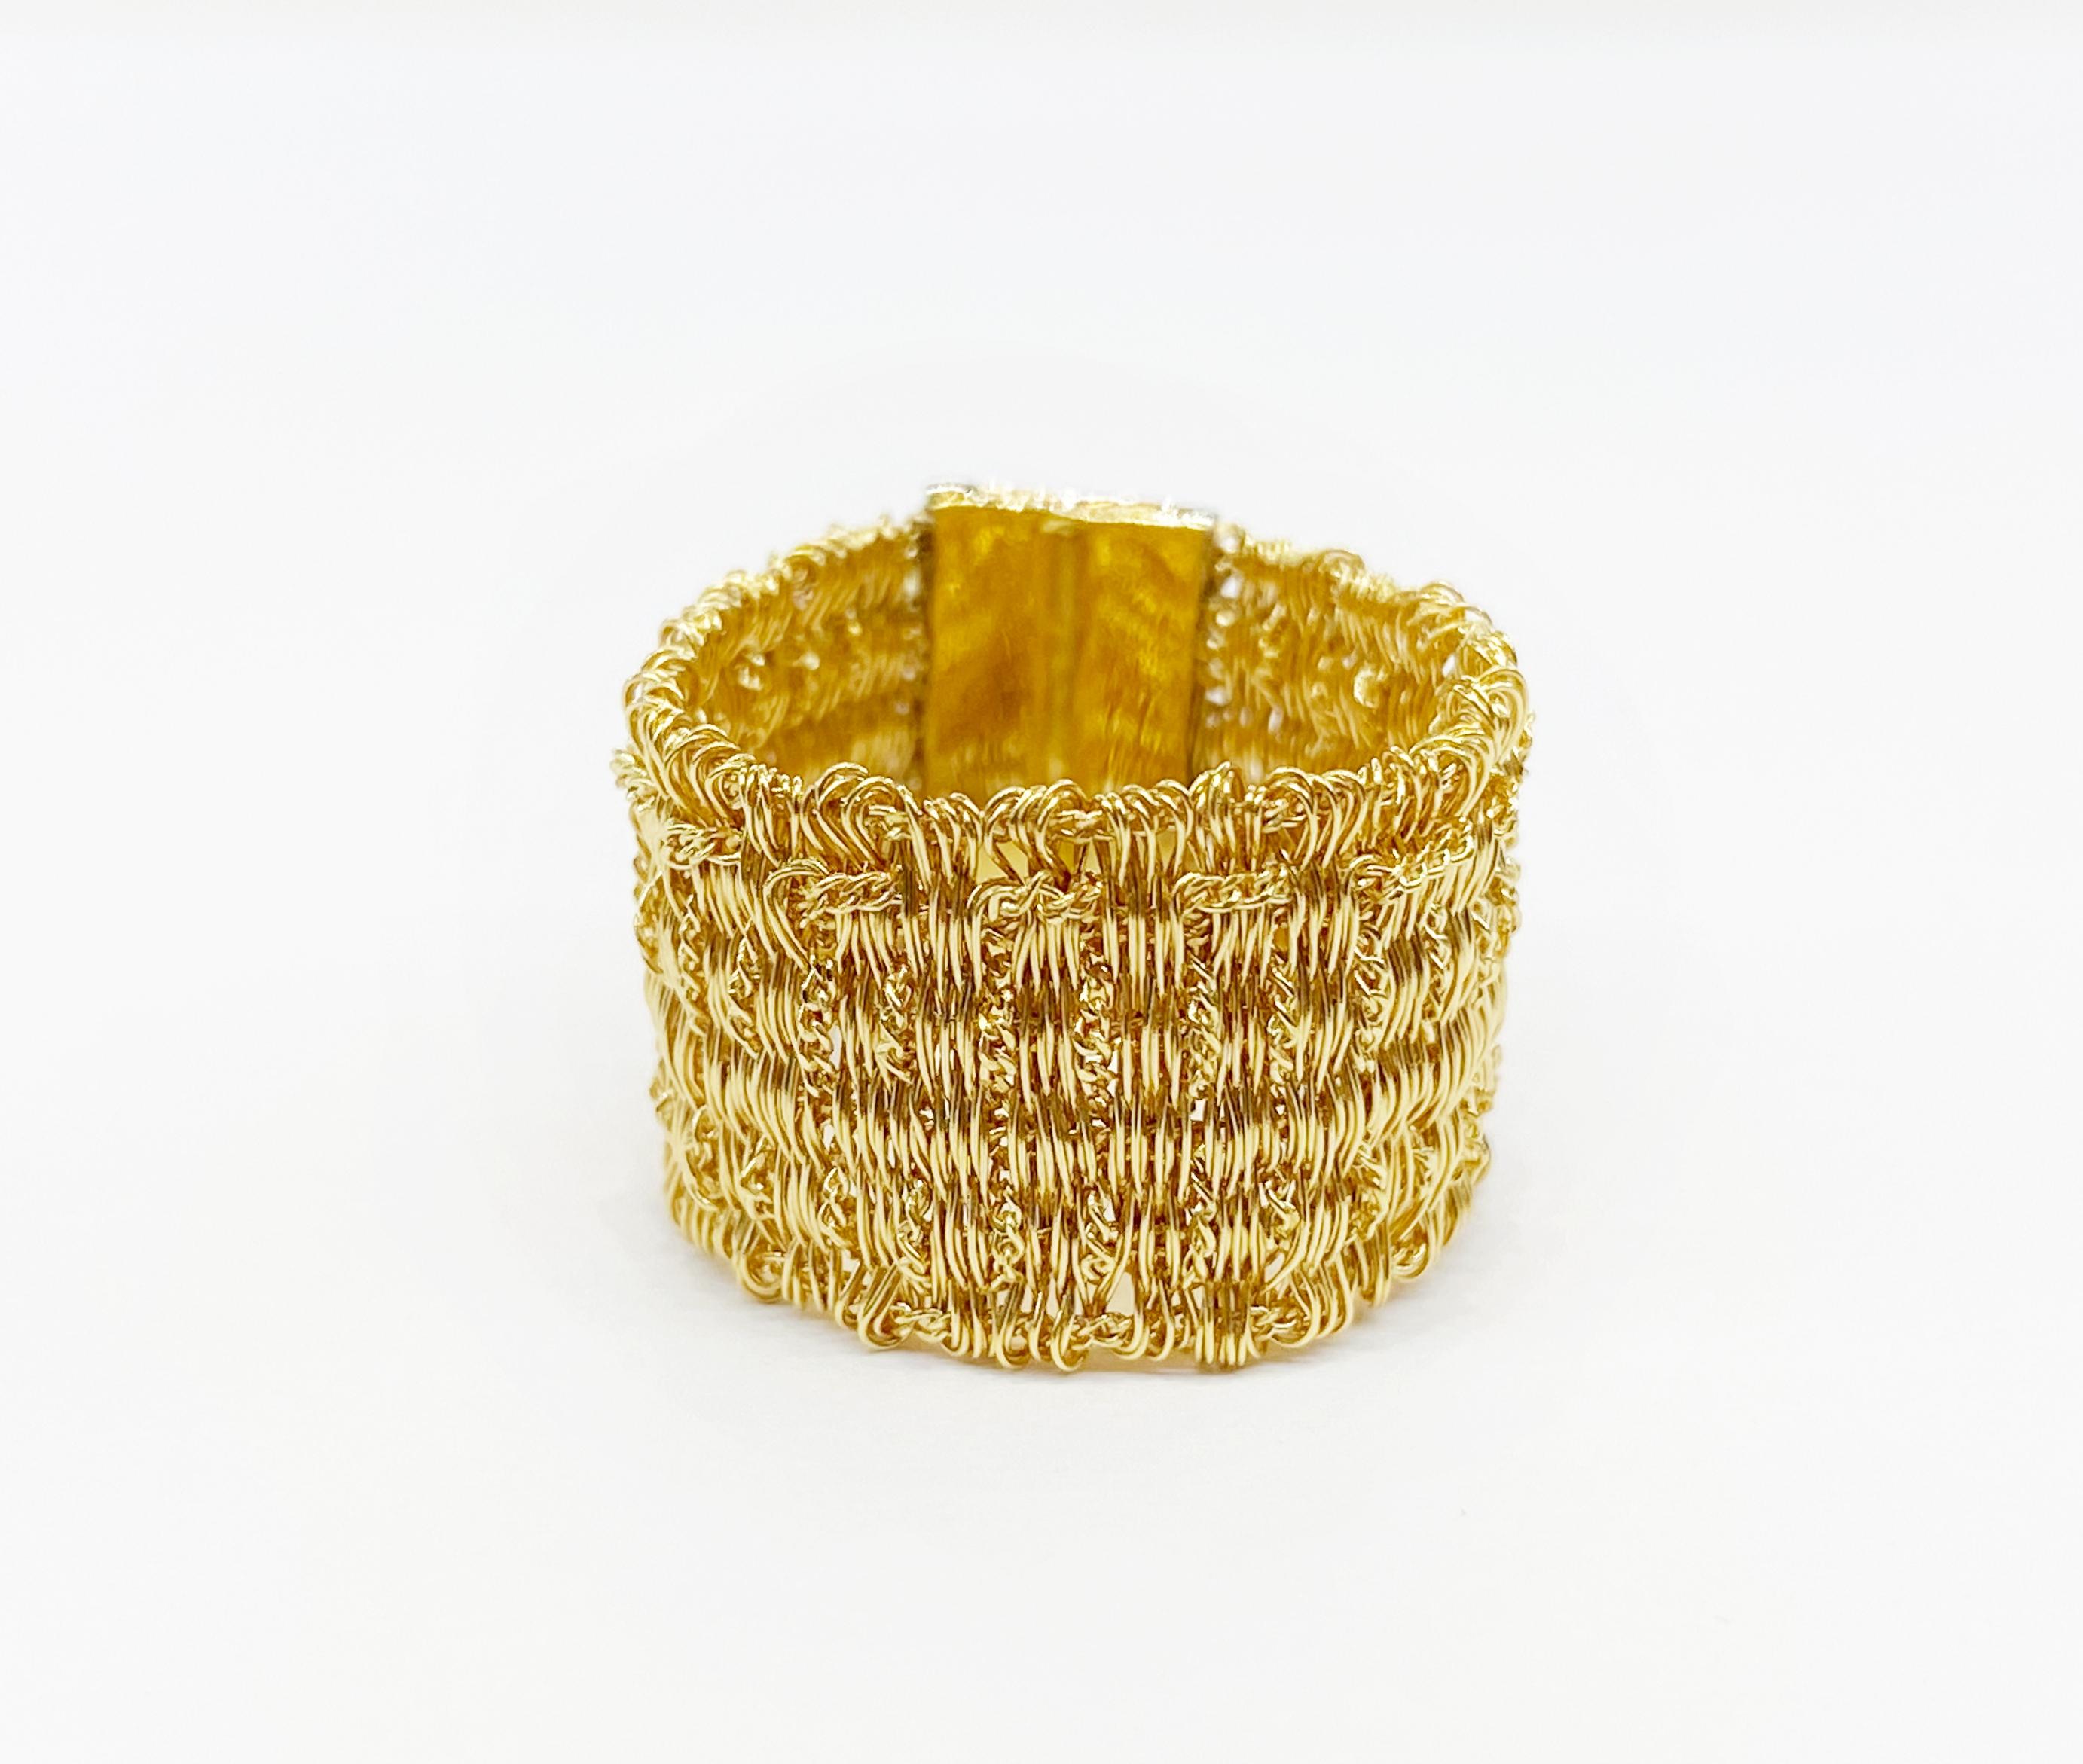 An extraordinary gold mesh ring, woven with 18 karat yellow gold thread and handmade in Italy.
O’Che 1867 was founded one and a half centuries ago in Macau. The brand is renowned for its high jewellery collections with fabulous designs. Our designs